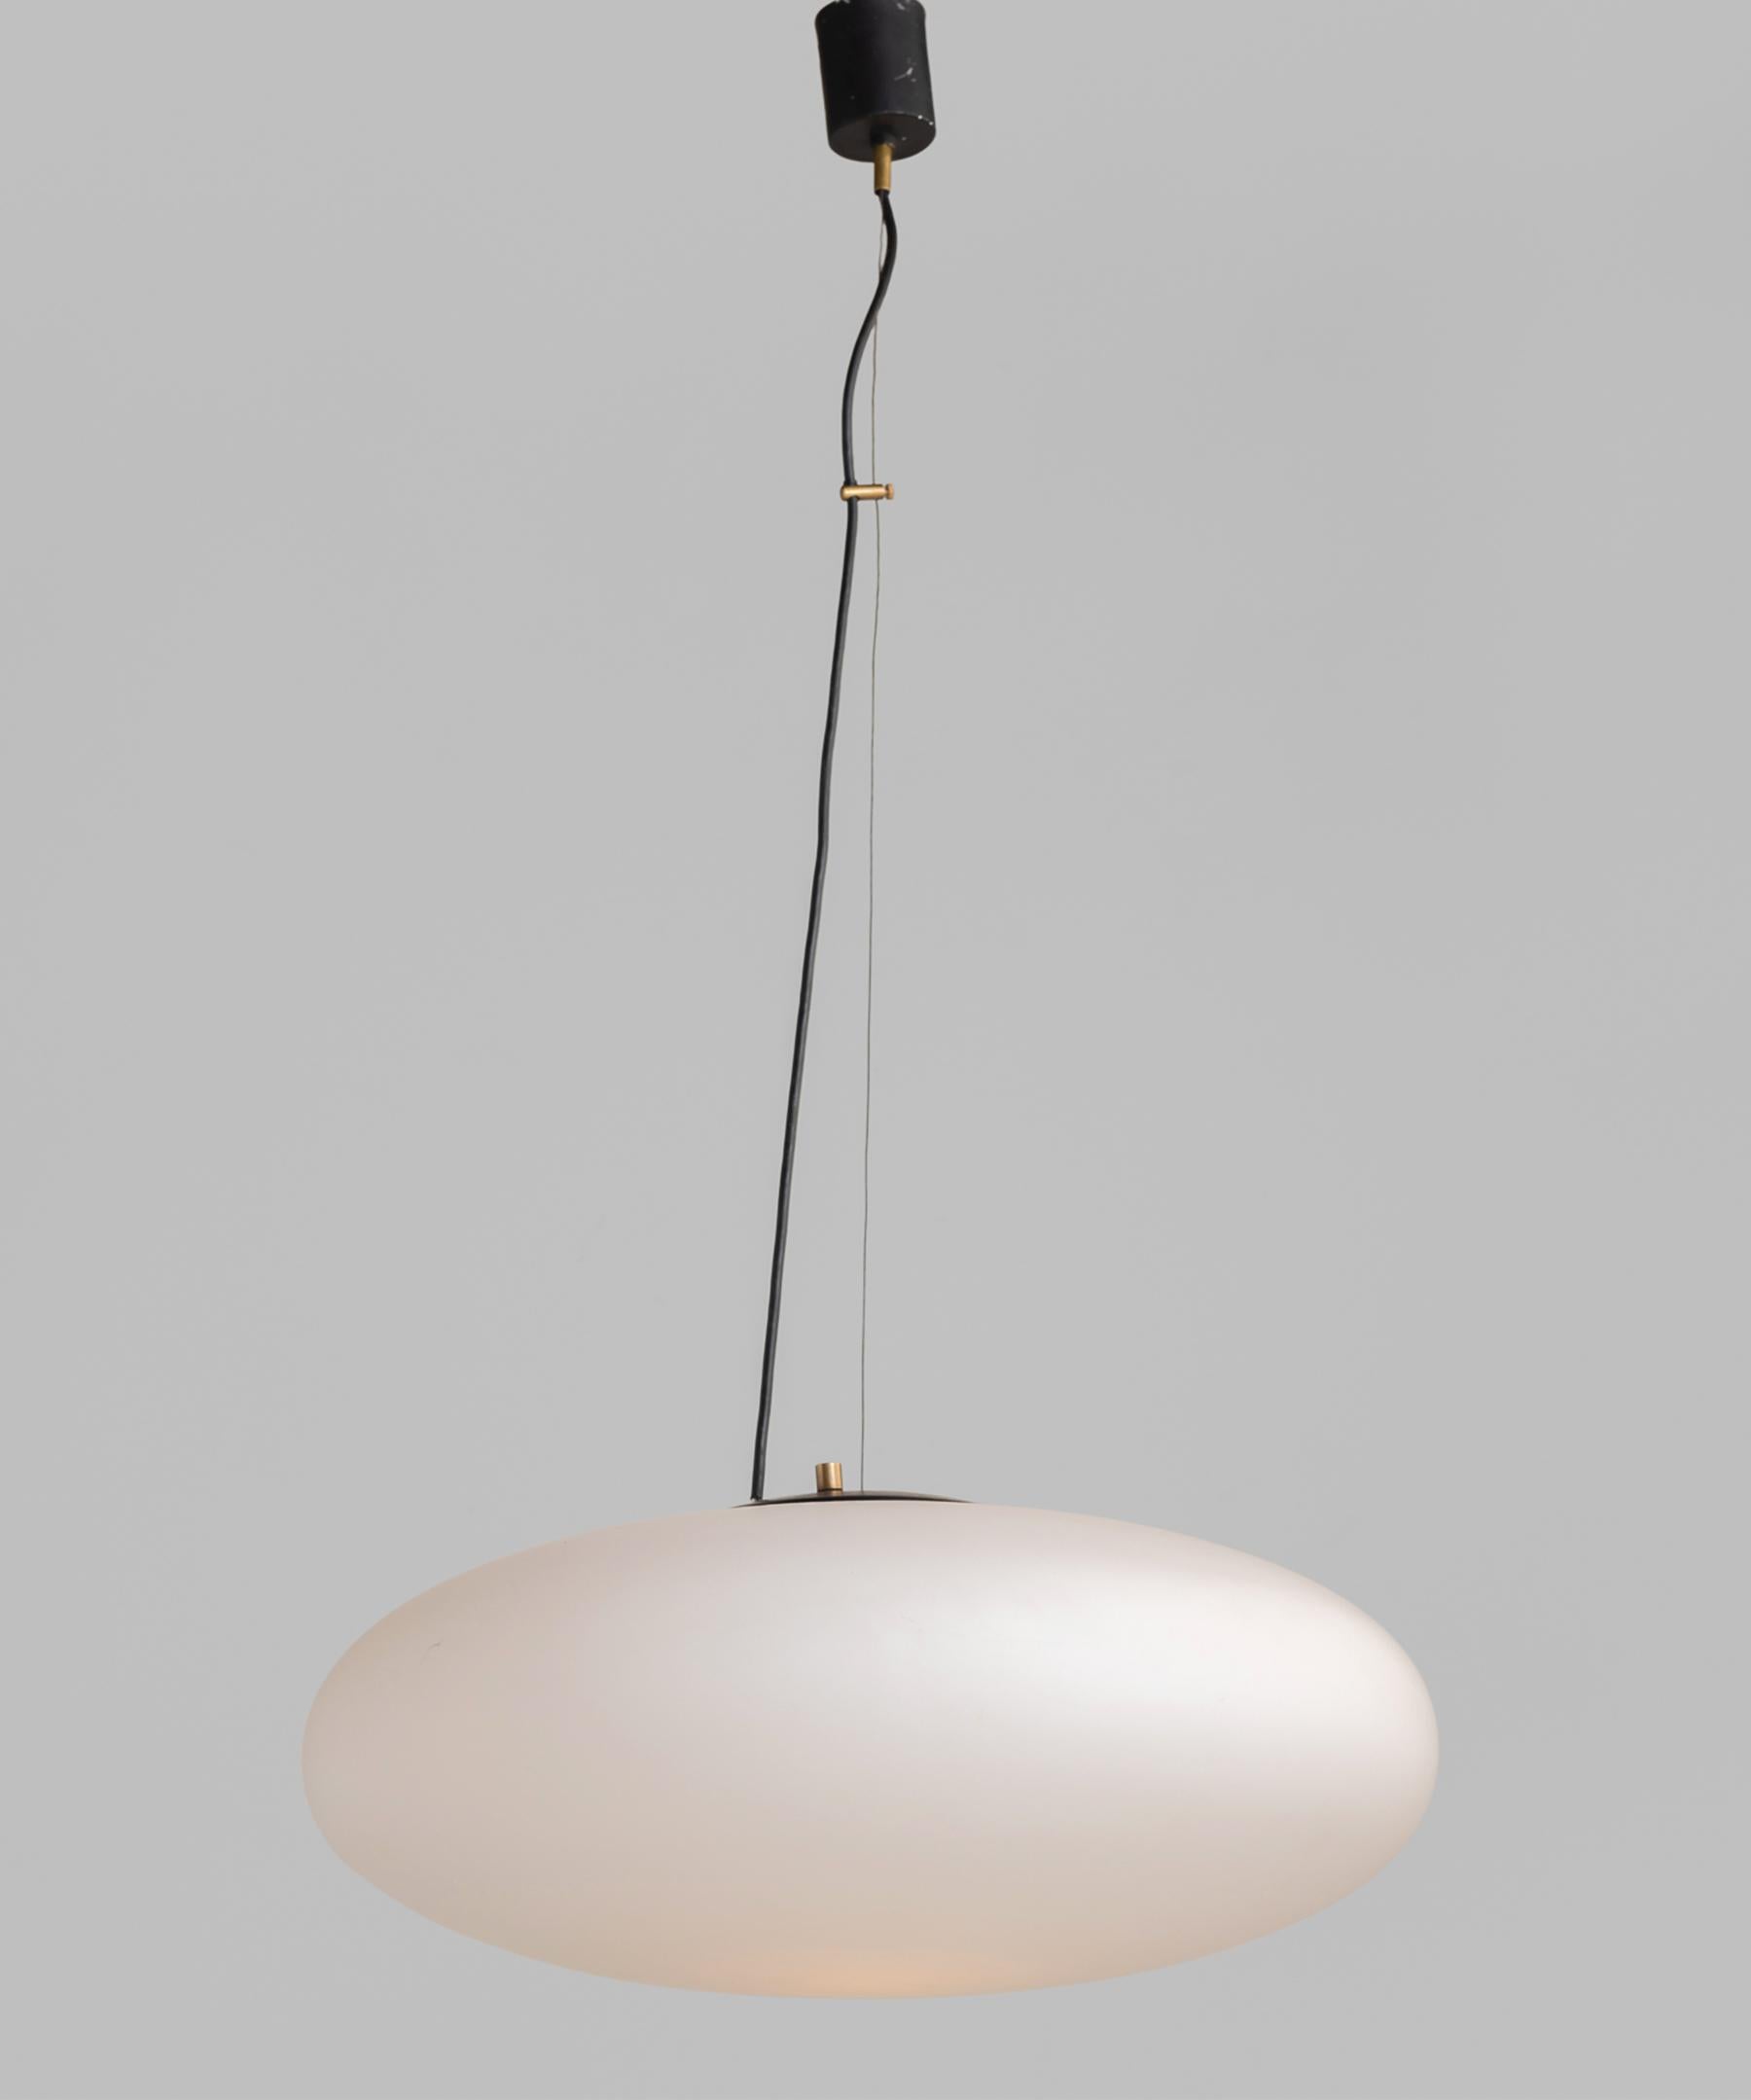 Stilnovo opaline suspension lamp, Italy, circa 1950.

Beautiful glass shade with original canopy and suspension wire.

Measures: 22